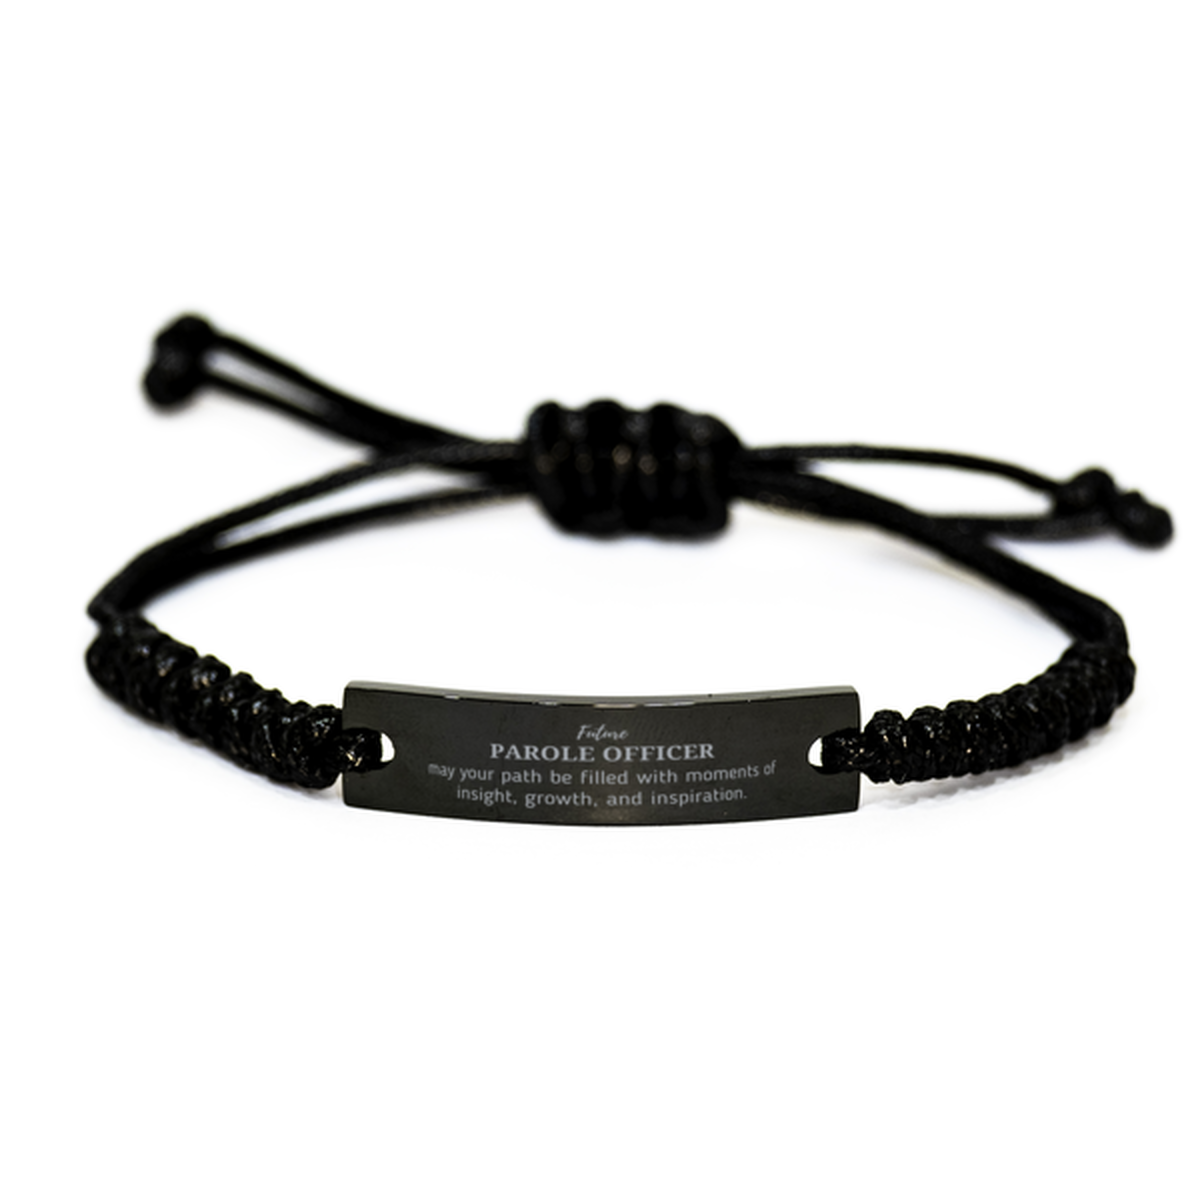 Future Parole Officer Gifts, May your path be filled with moments of insight, Graduation Gifts for New Parole Officer, Christmas Unique Black Rope Bracelet For Men, Women, Friends